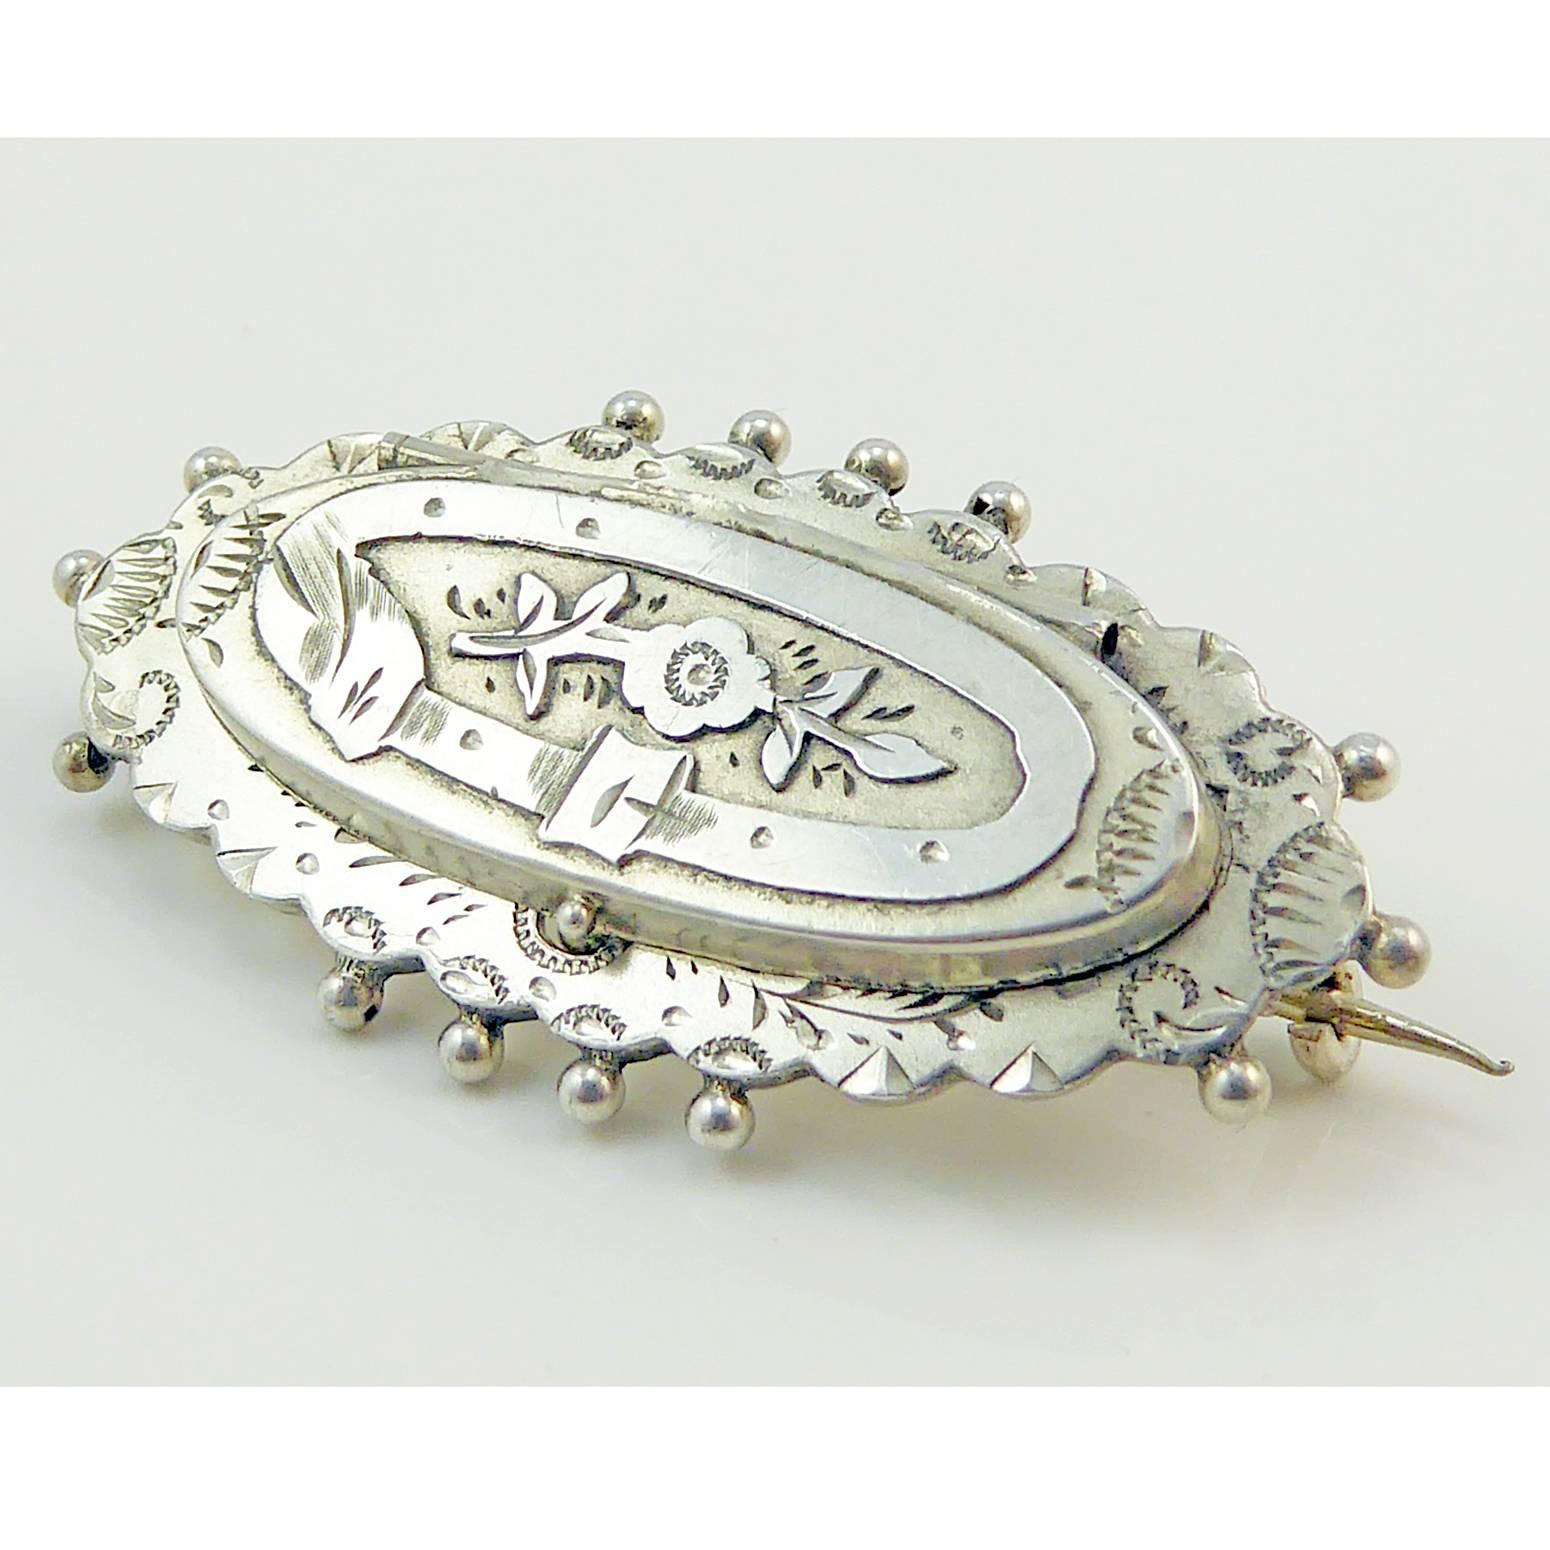 A beautiful antique silver brooch with a hidden message.  In an oval shape with scalloped and beaded edge, the brooch has a raised and hinged section with is engraved with the sentimental belt and buckle motif enclosing a forget-me-not flower.  Lift